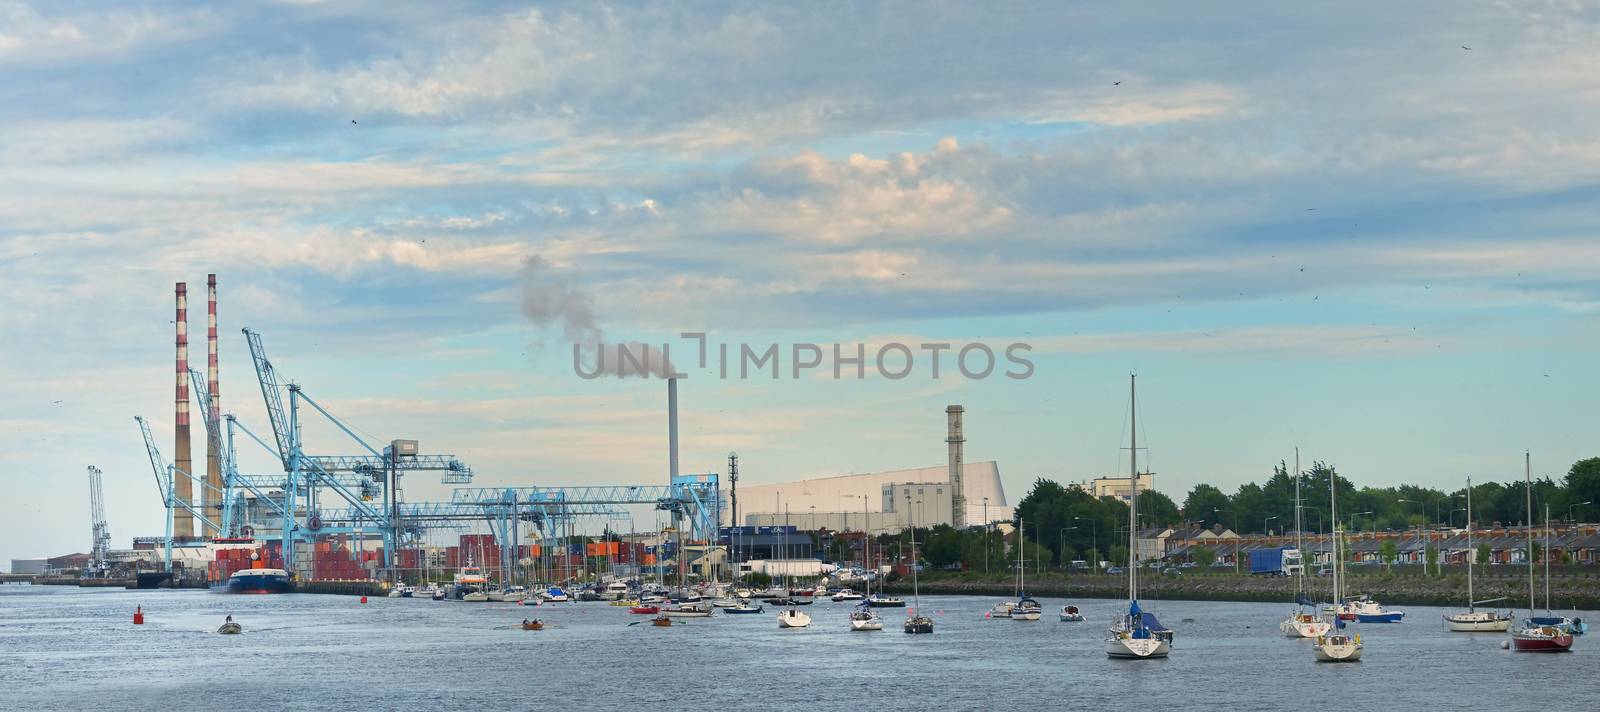 Dublin, Ireland - July 30, 2020 Poolbeg Power Station In The Harbour Producing